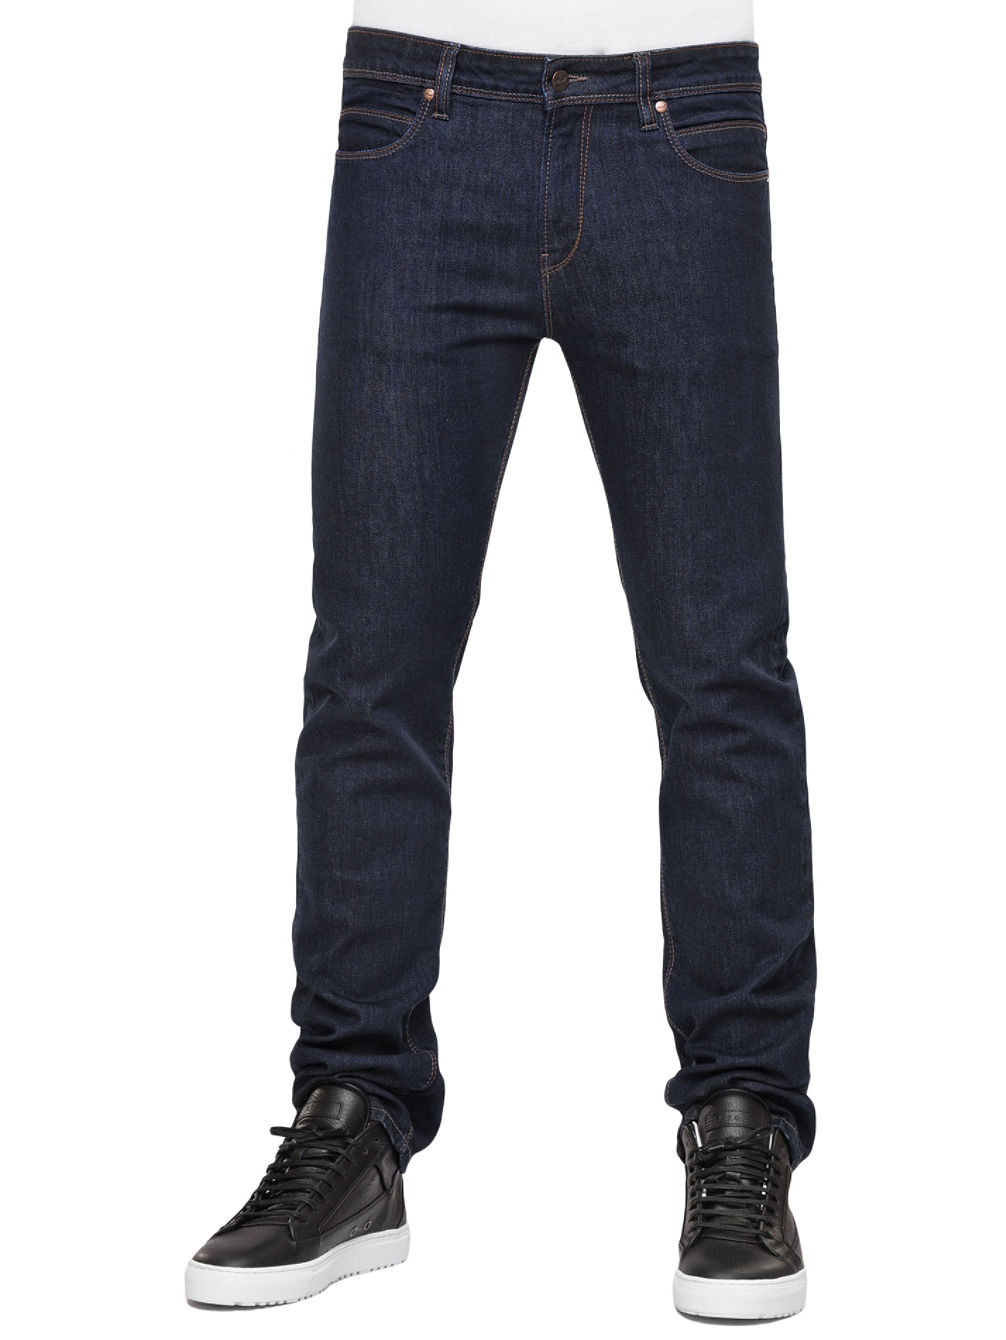 Buy REELL Skin 2 Jeans online at blue-tomato.com